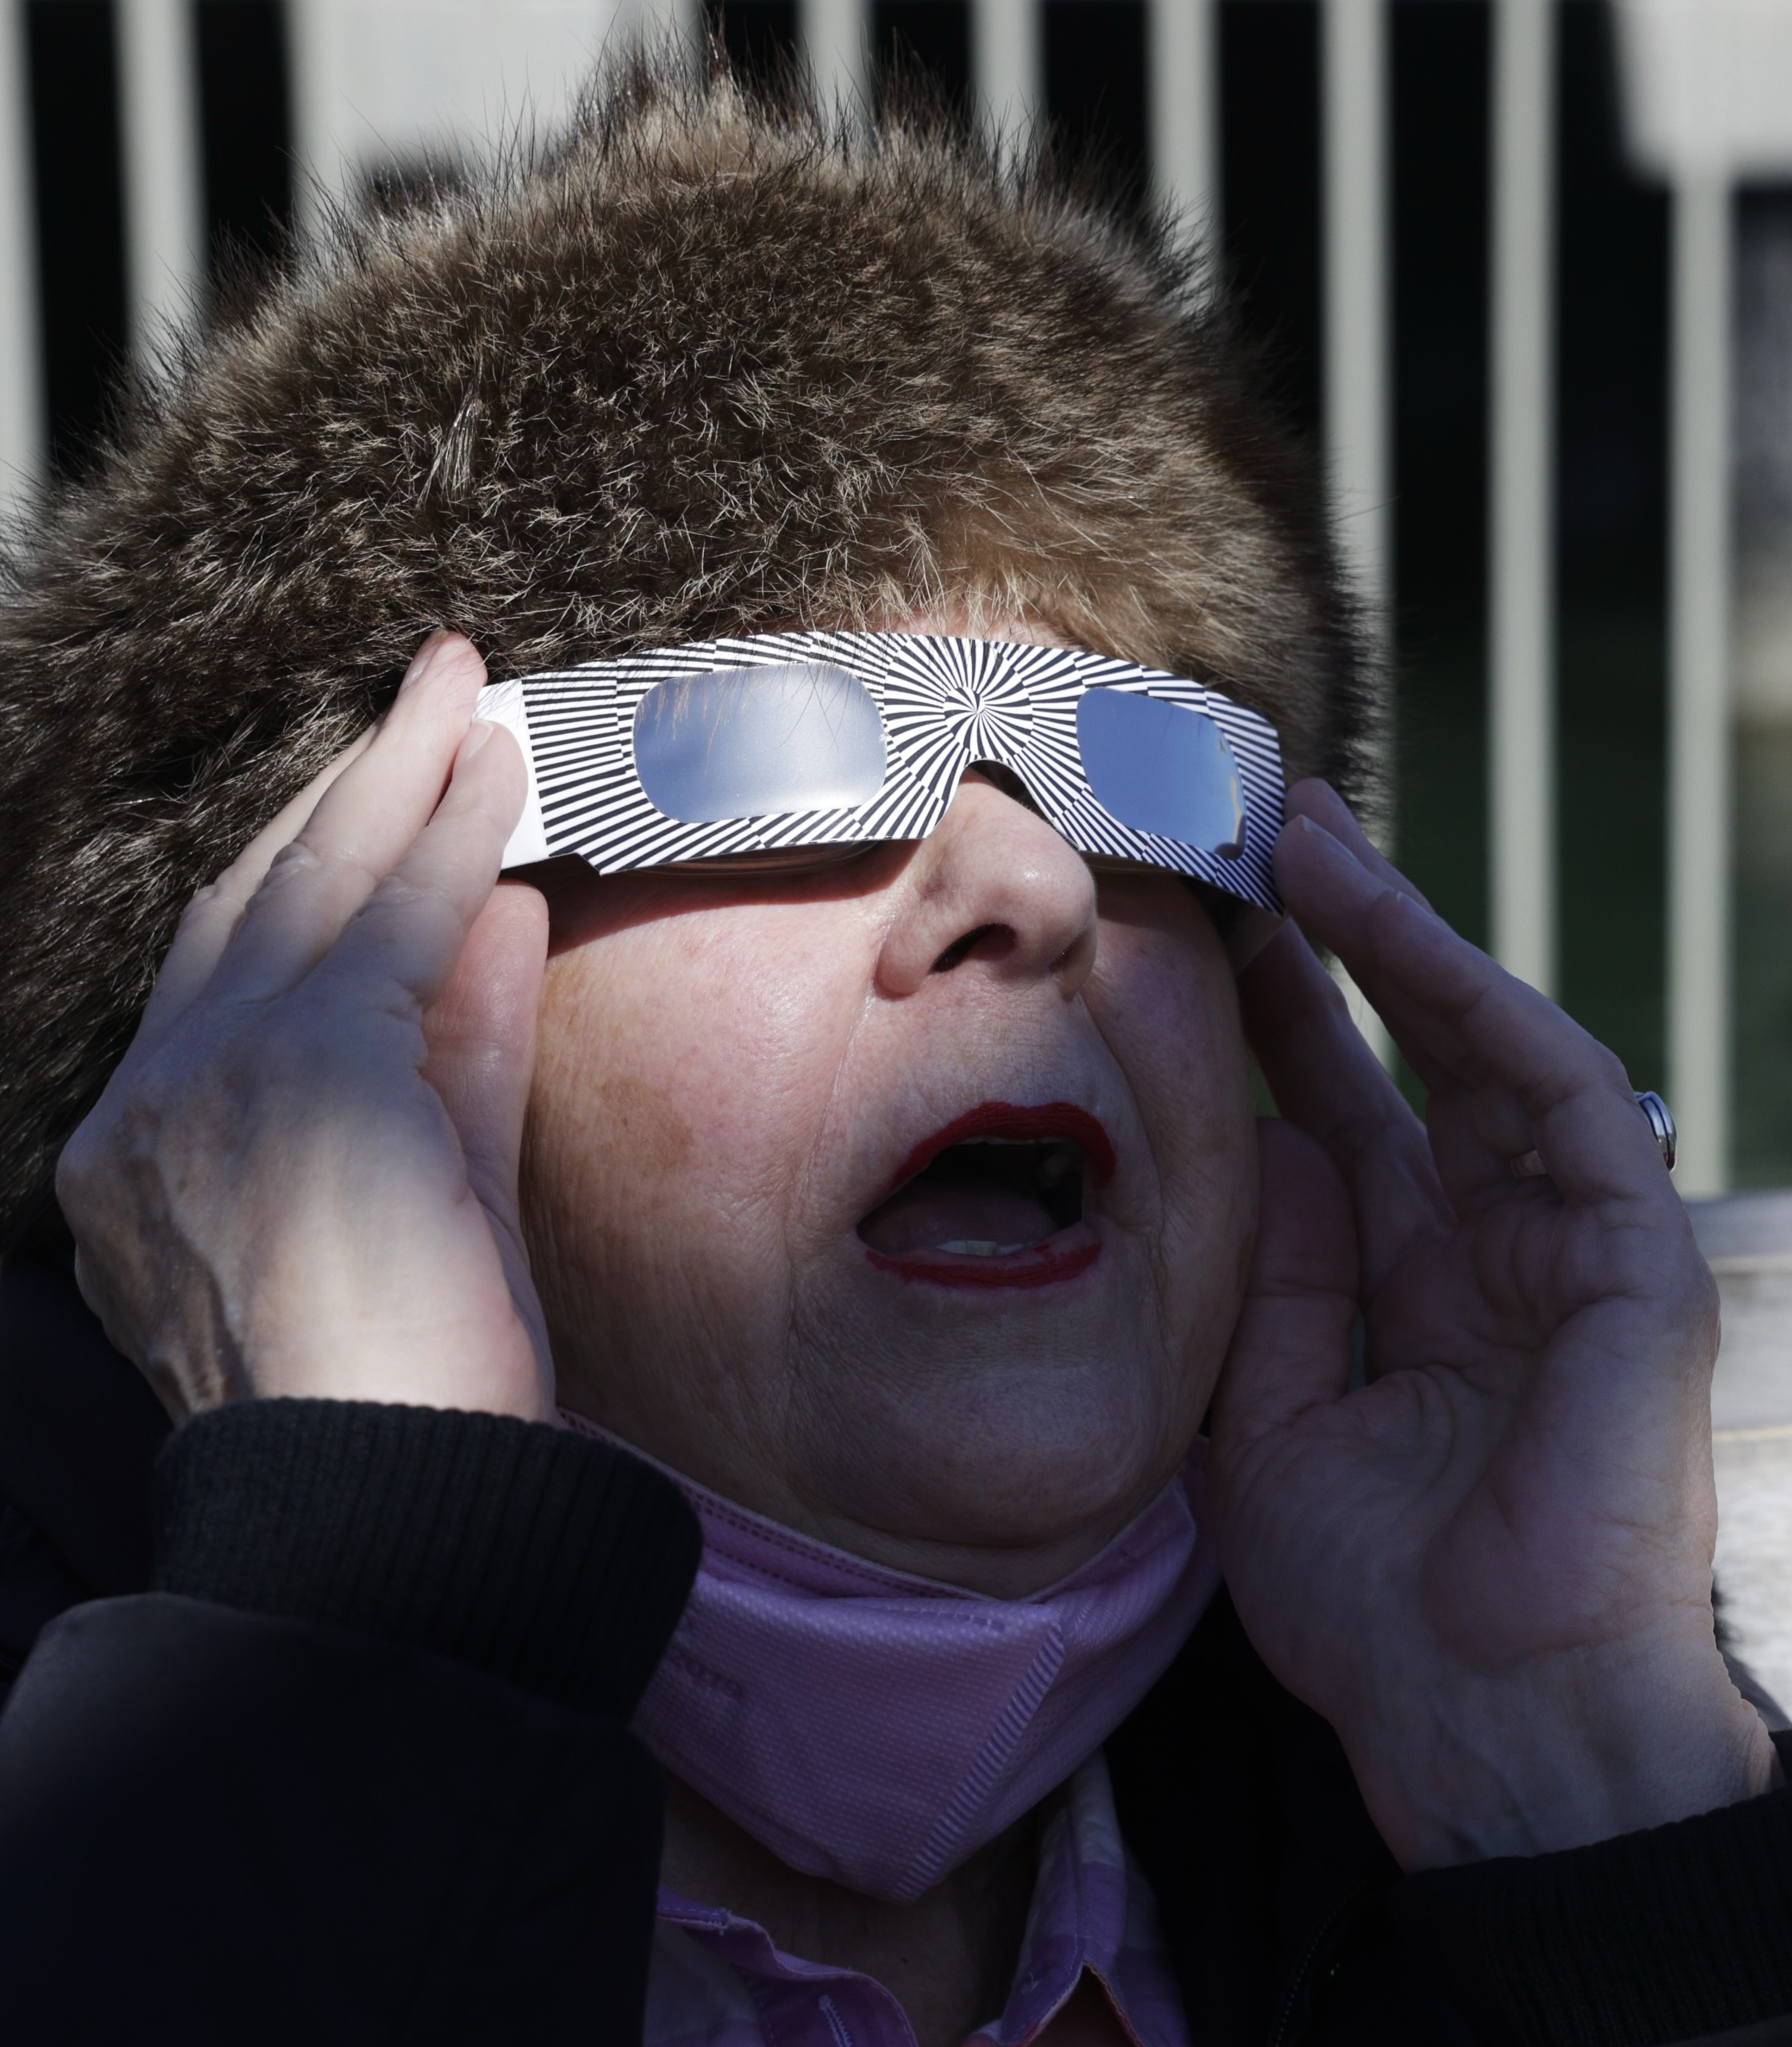 A person is wearing special glasses, likely viewing an eclipse, with a fur hat and an open mouth in awe.